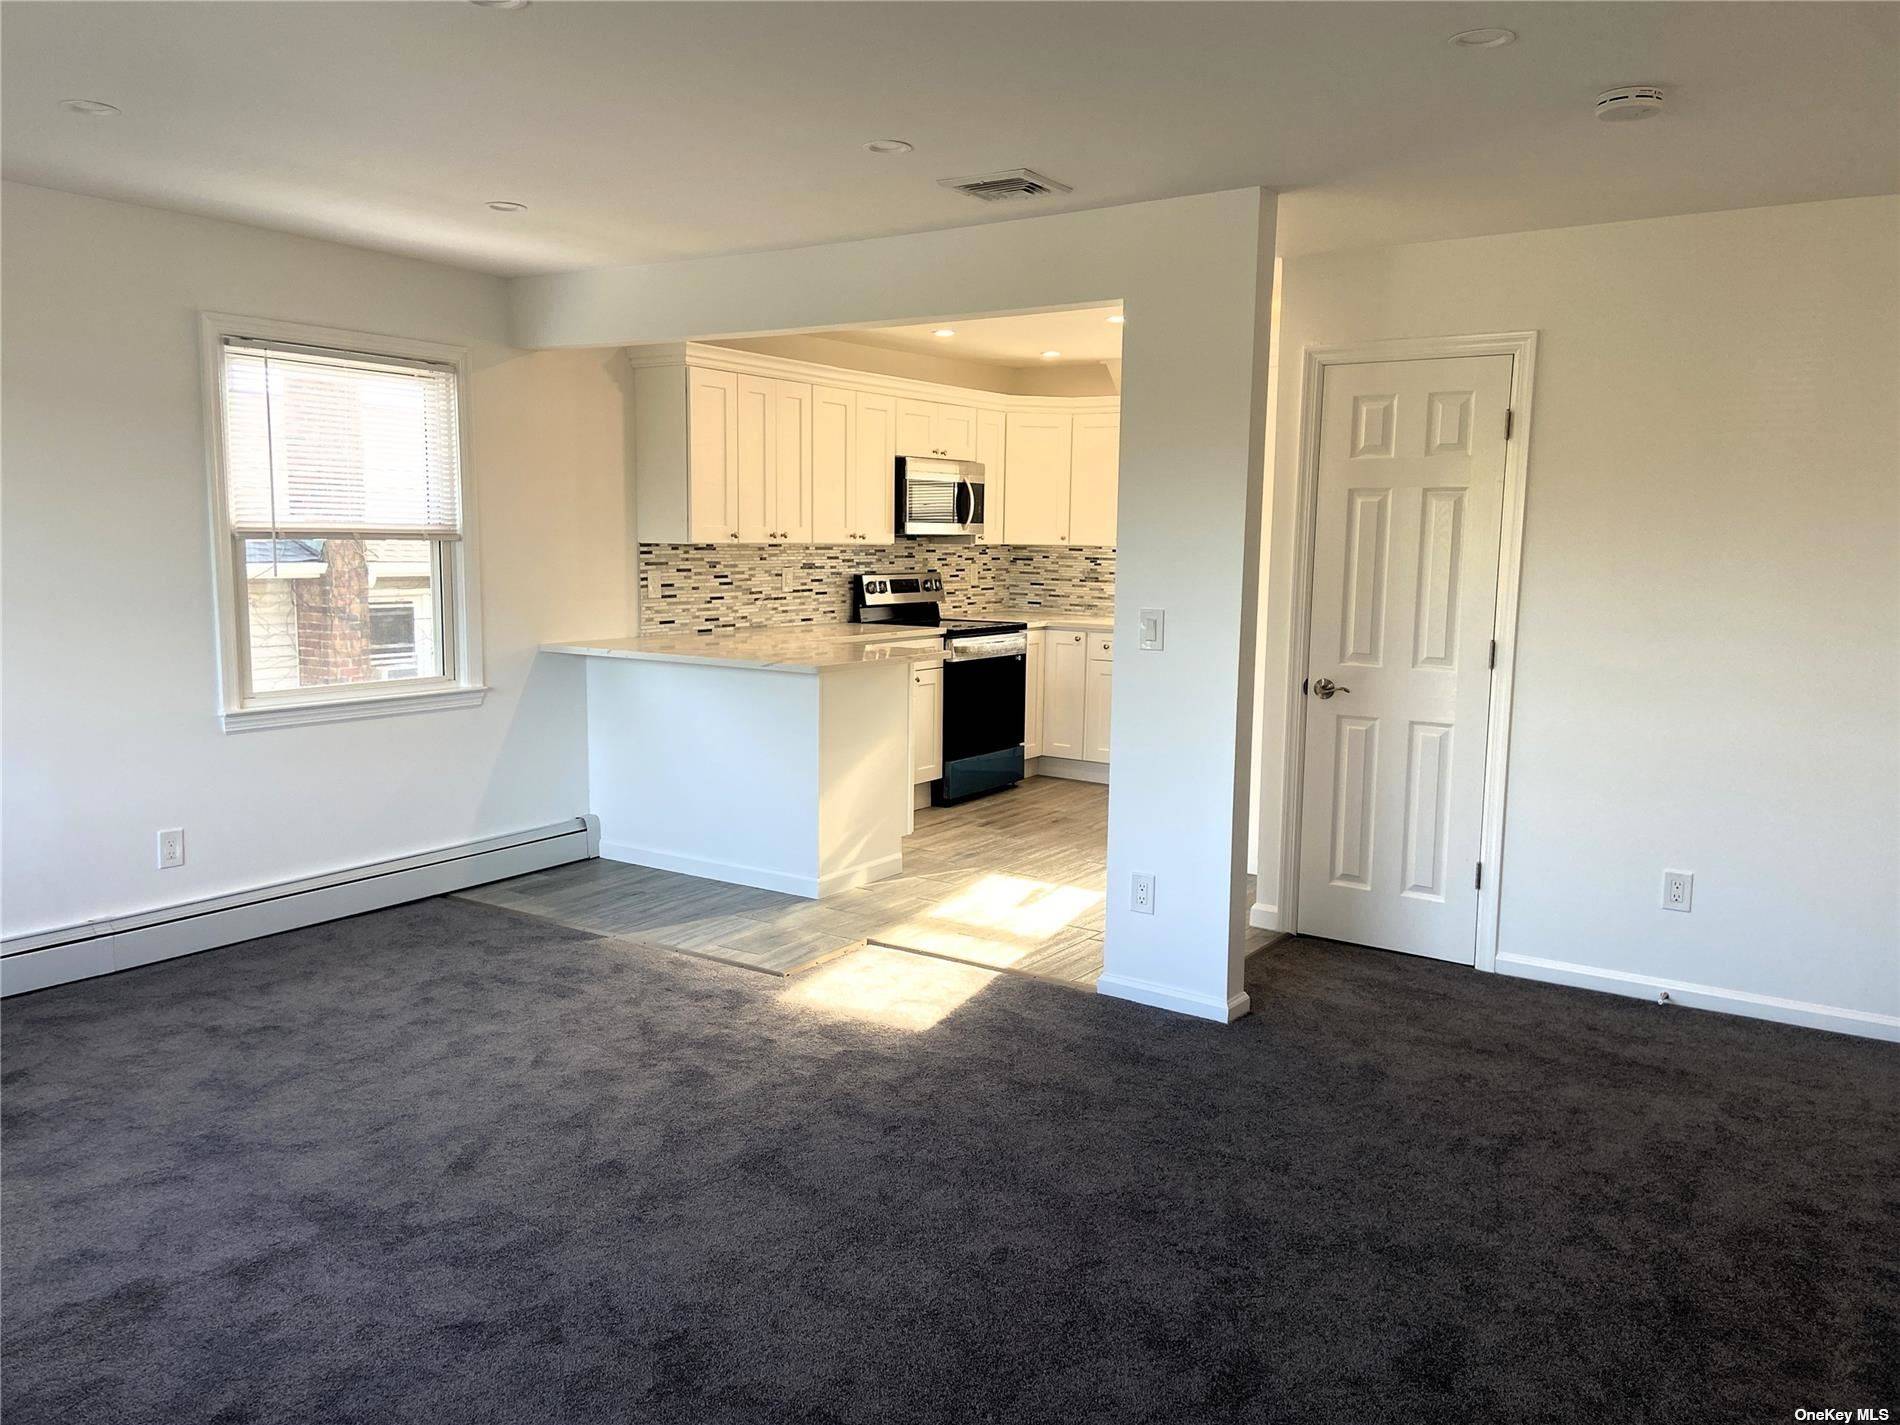 Amazing Unit with all the Necessities in an Excellent Location Close to all Shops, Transportation and Main Arteries of Long Beach.